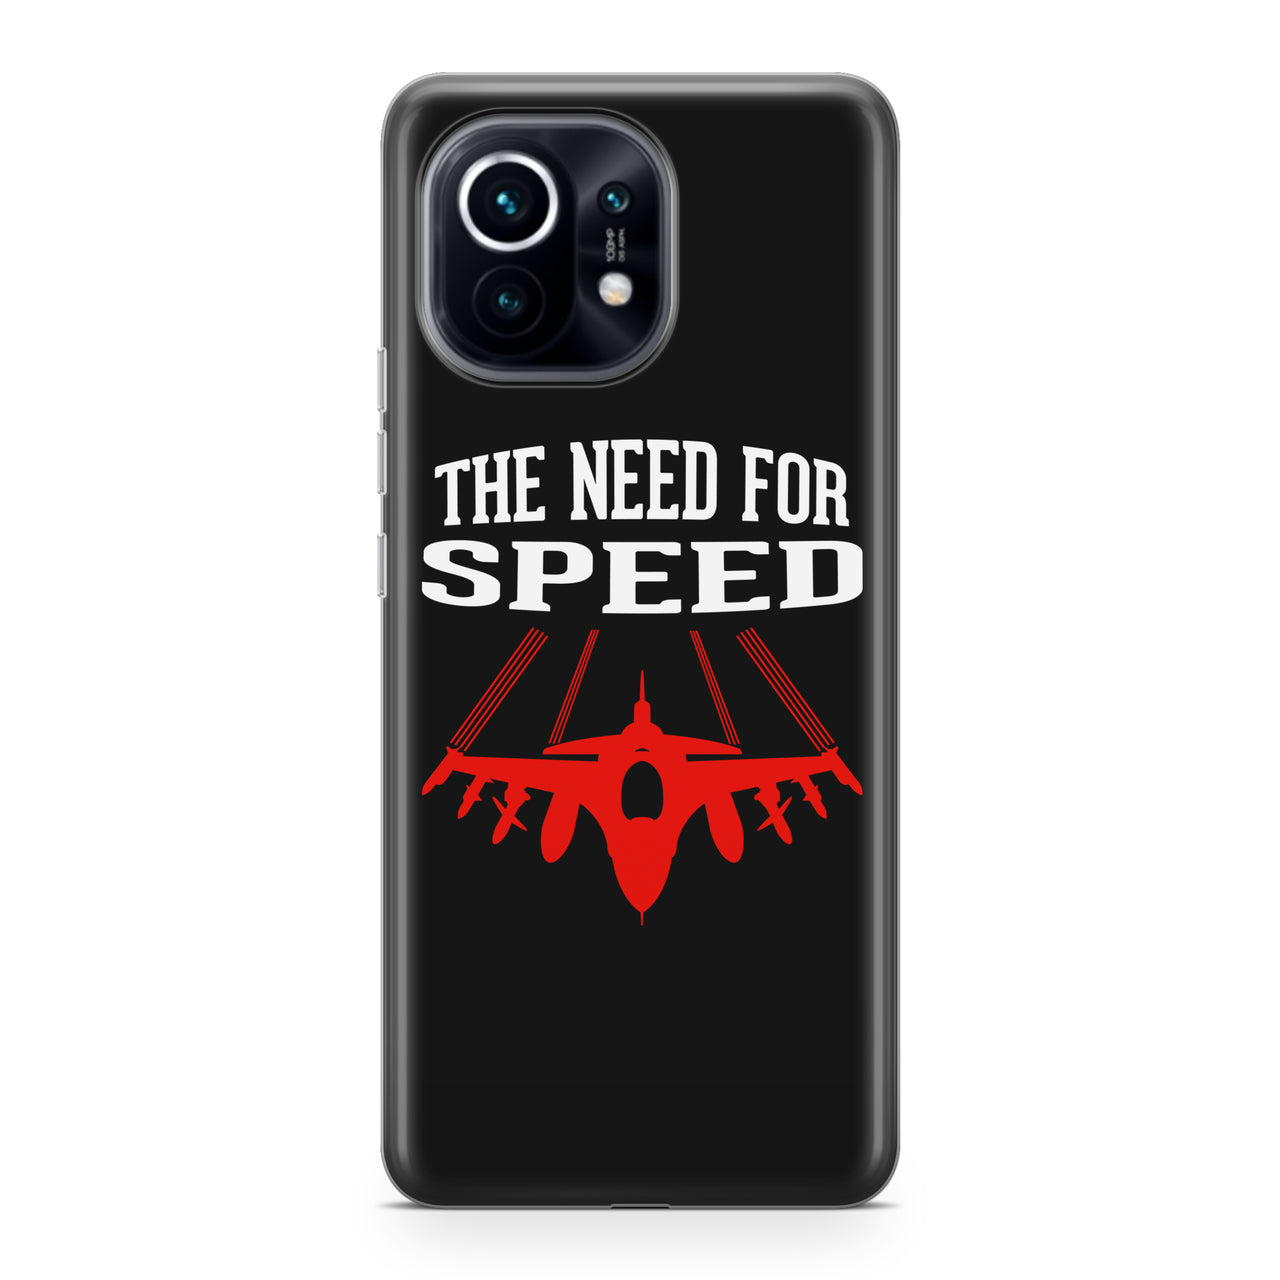 The Need For Speed Designed Xiaomi Cases